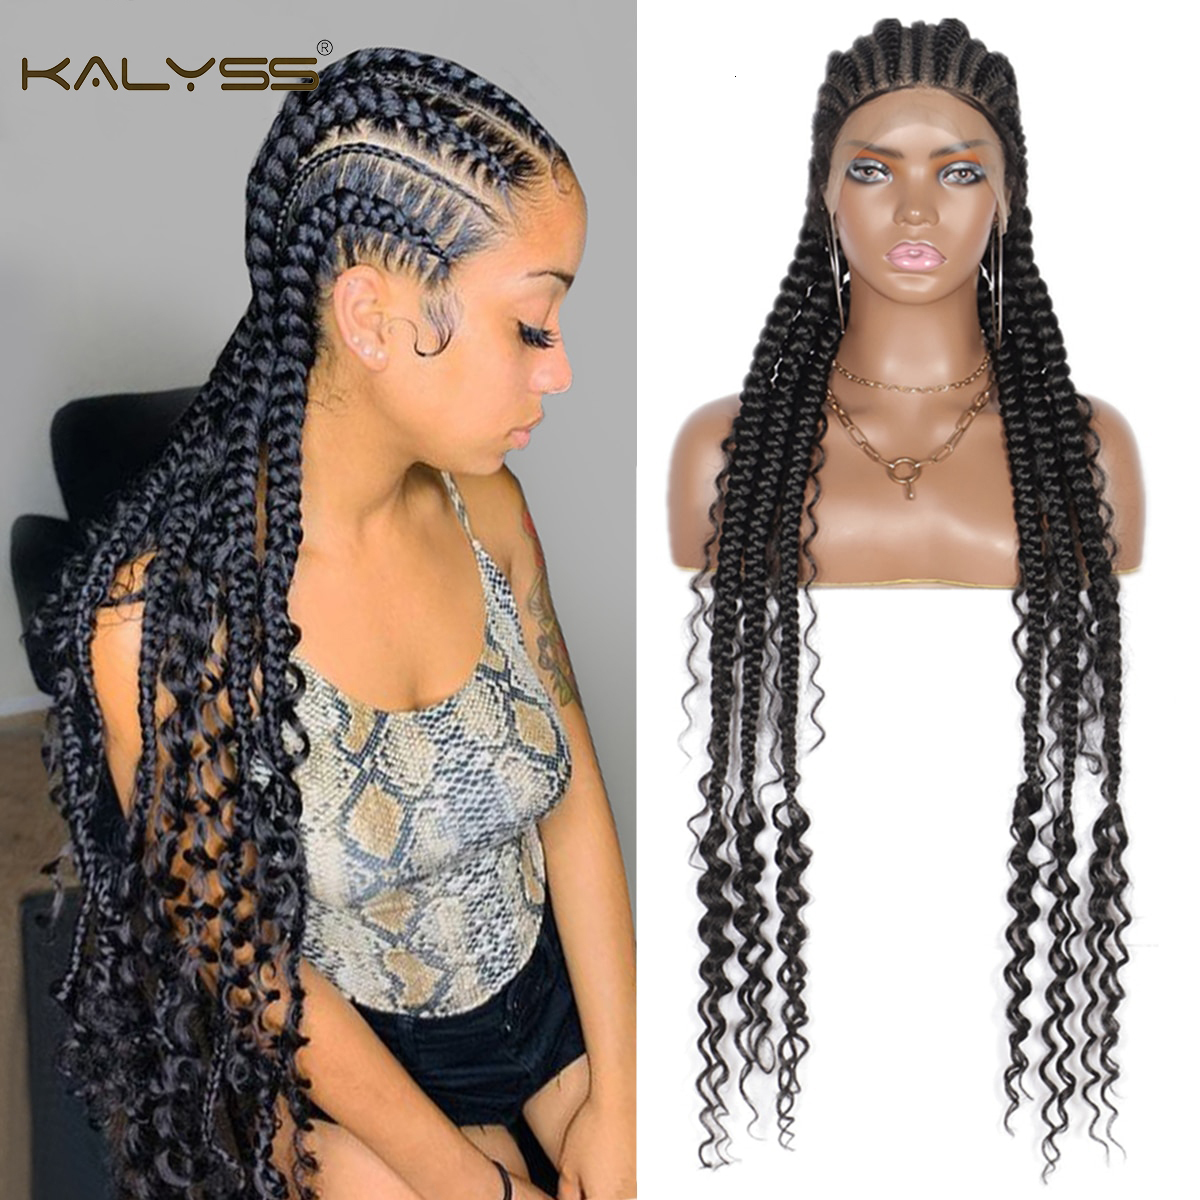 

Human Hair Wigs Kalyss Synthetic Box Cornrow Braided 35" Full Lace Front Wig Braiding afro braid wig With Baby For Black Women 230217, Ombre color